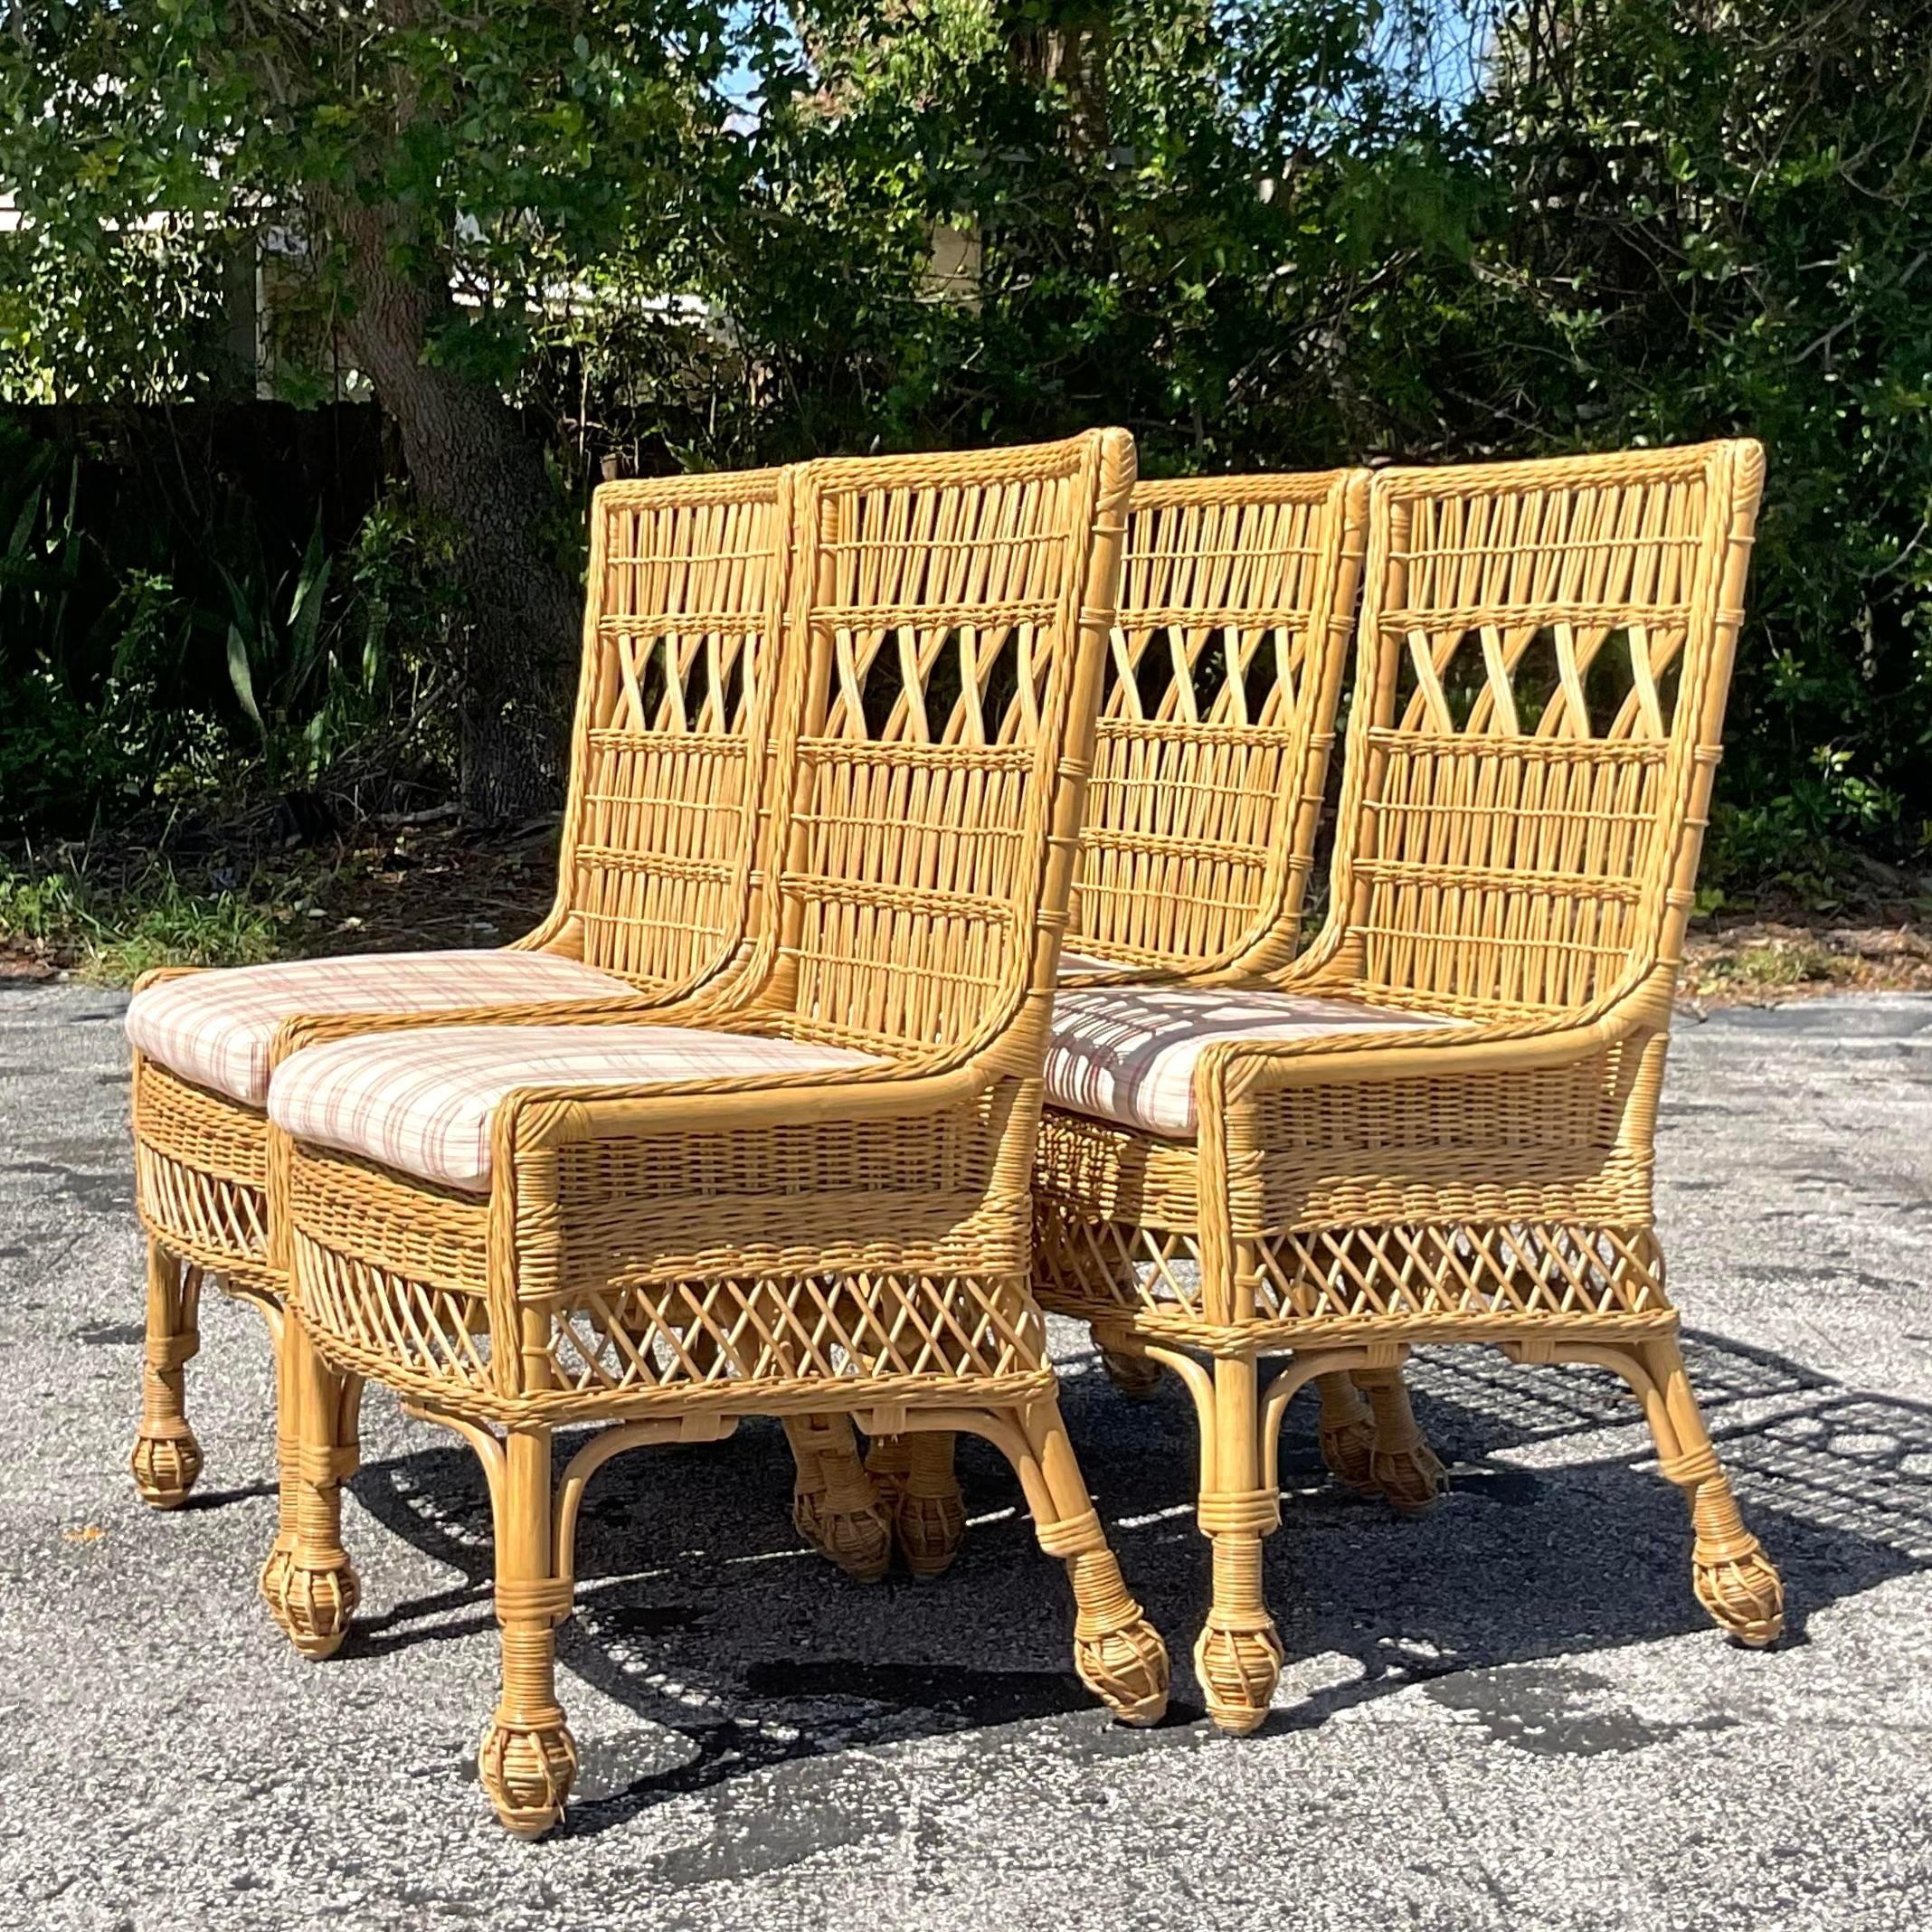 Philippine Vintage Coastal Woven Rattan Dining Chairs - Set of 4 For Sale